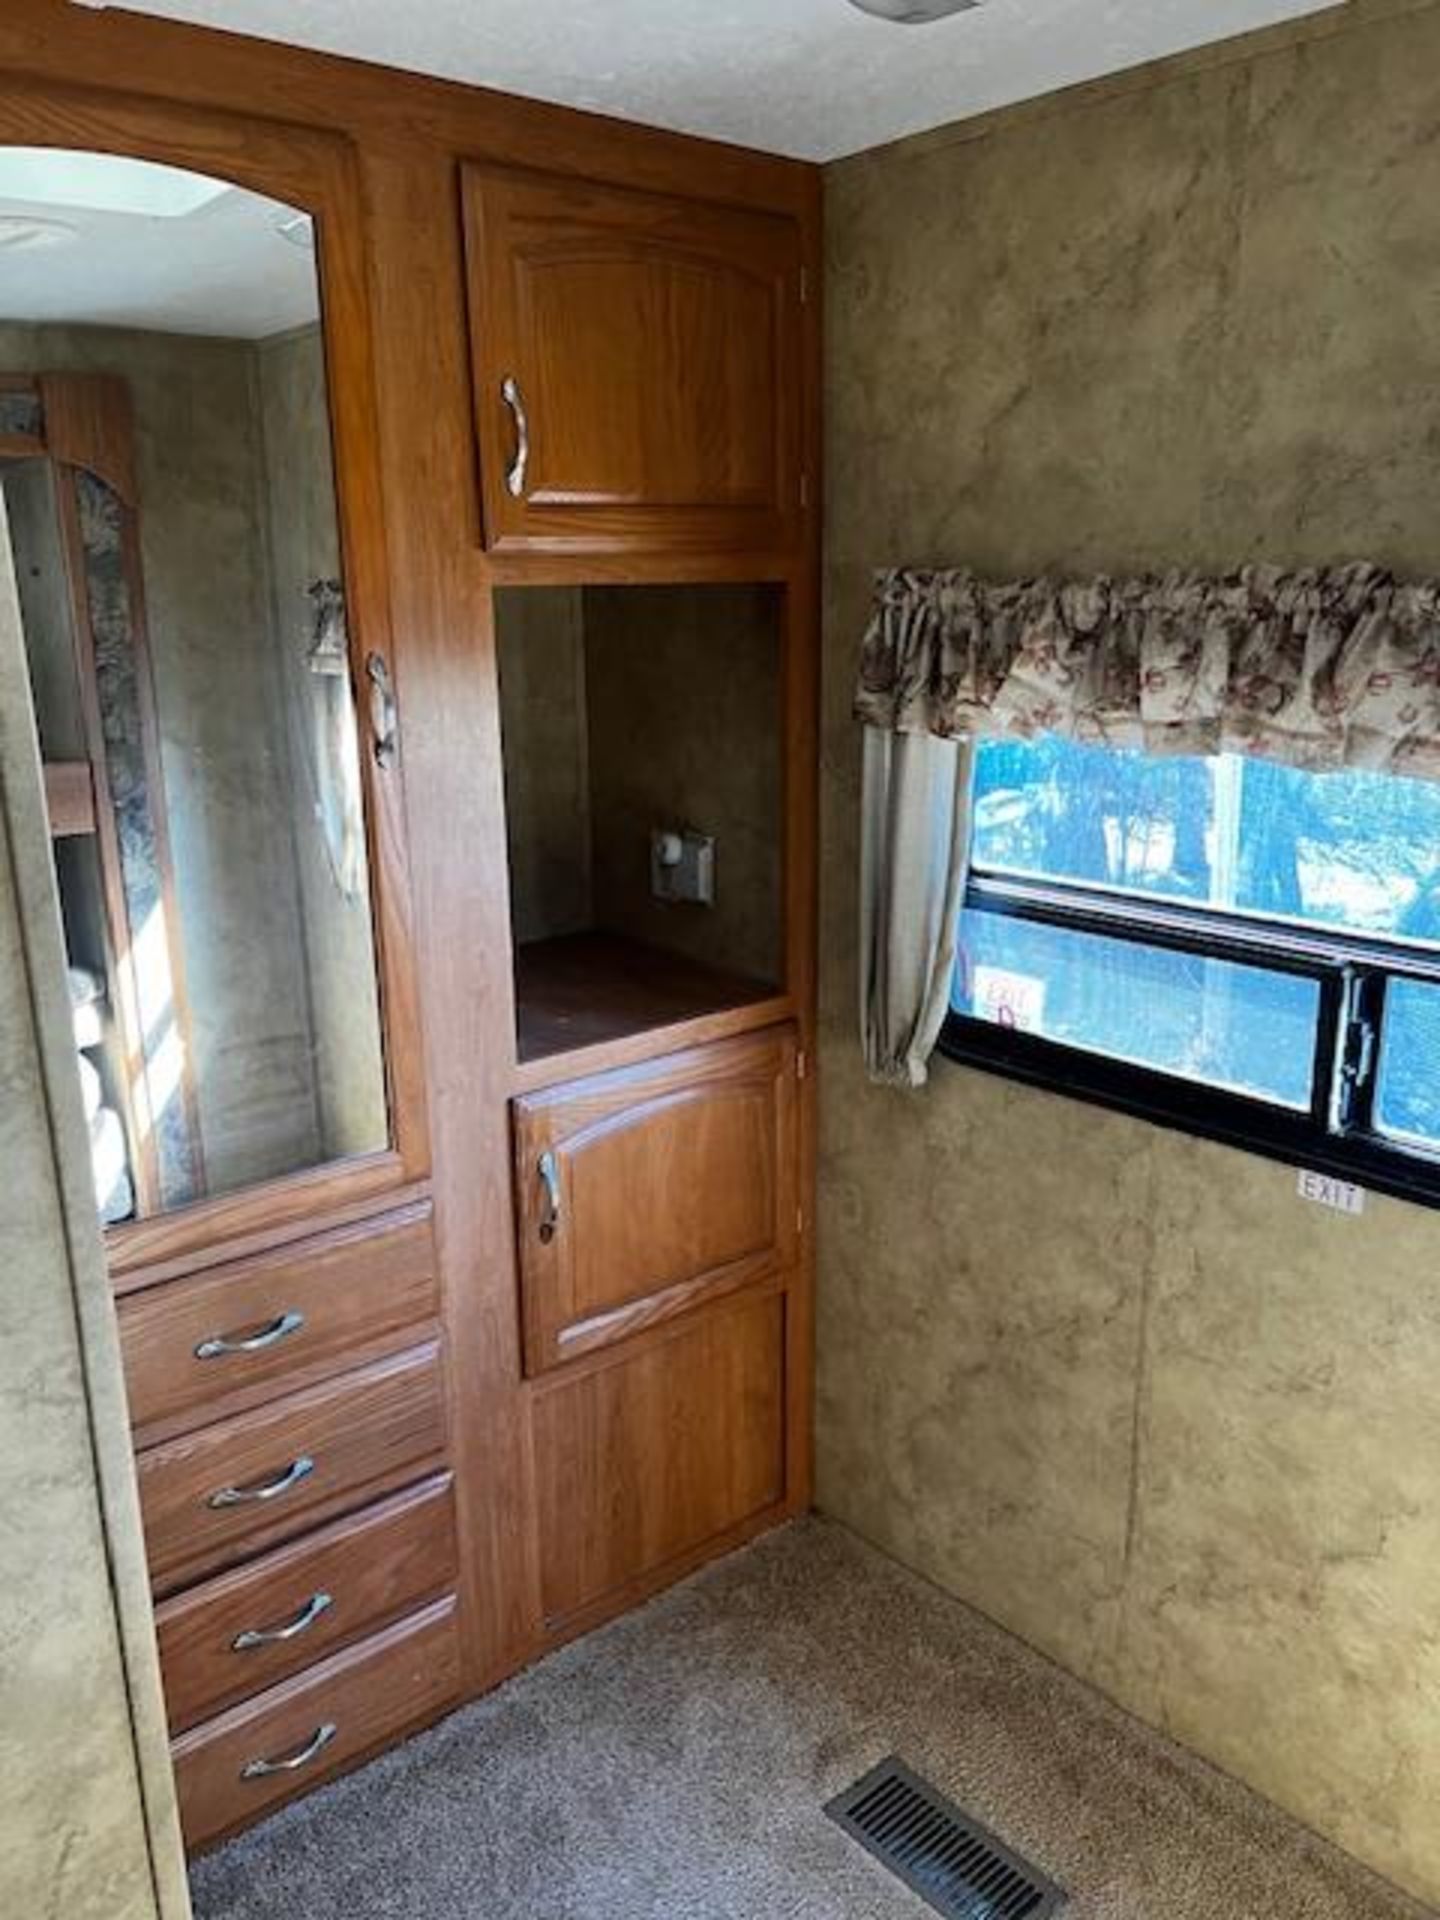 2008 COUGAR 304 VHS 30' TRAVEL TRAILER W/2 S/O, WINTERIZED, S/N: 4YDT304288C507042 - Image 15 of 20